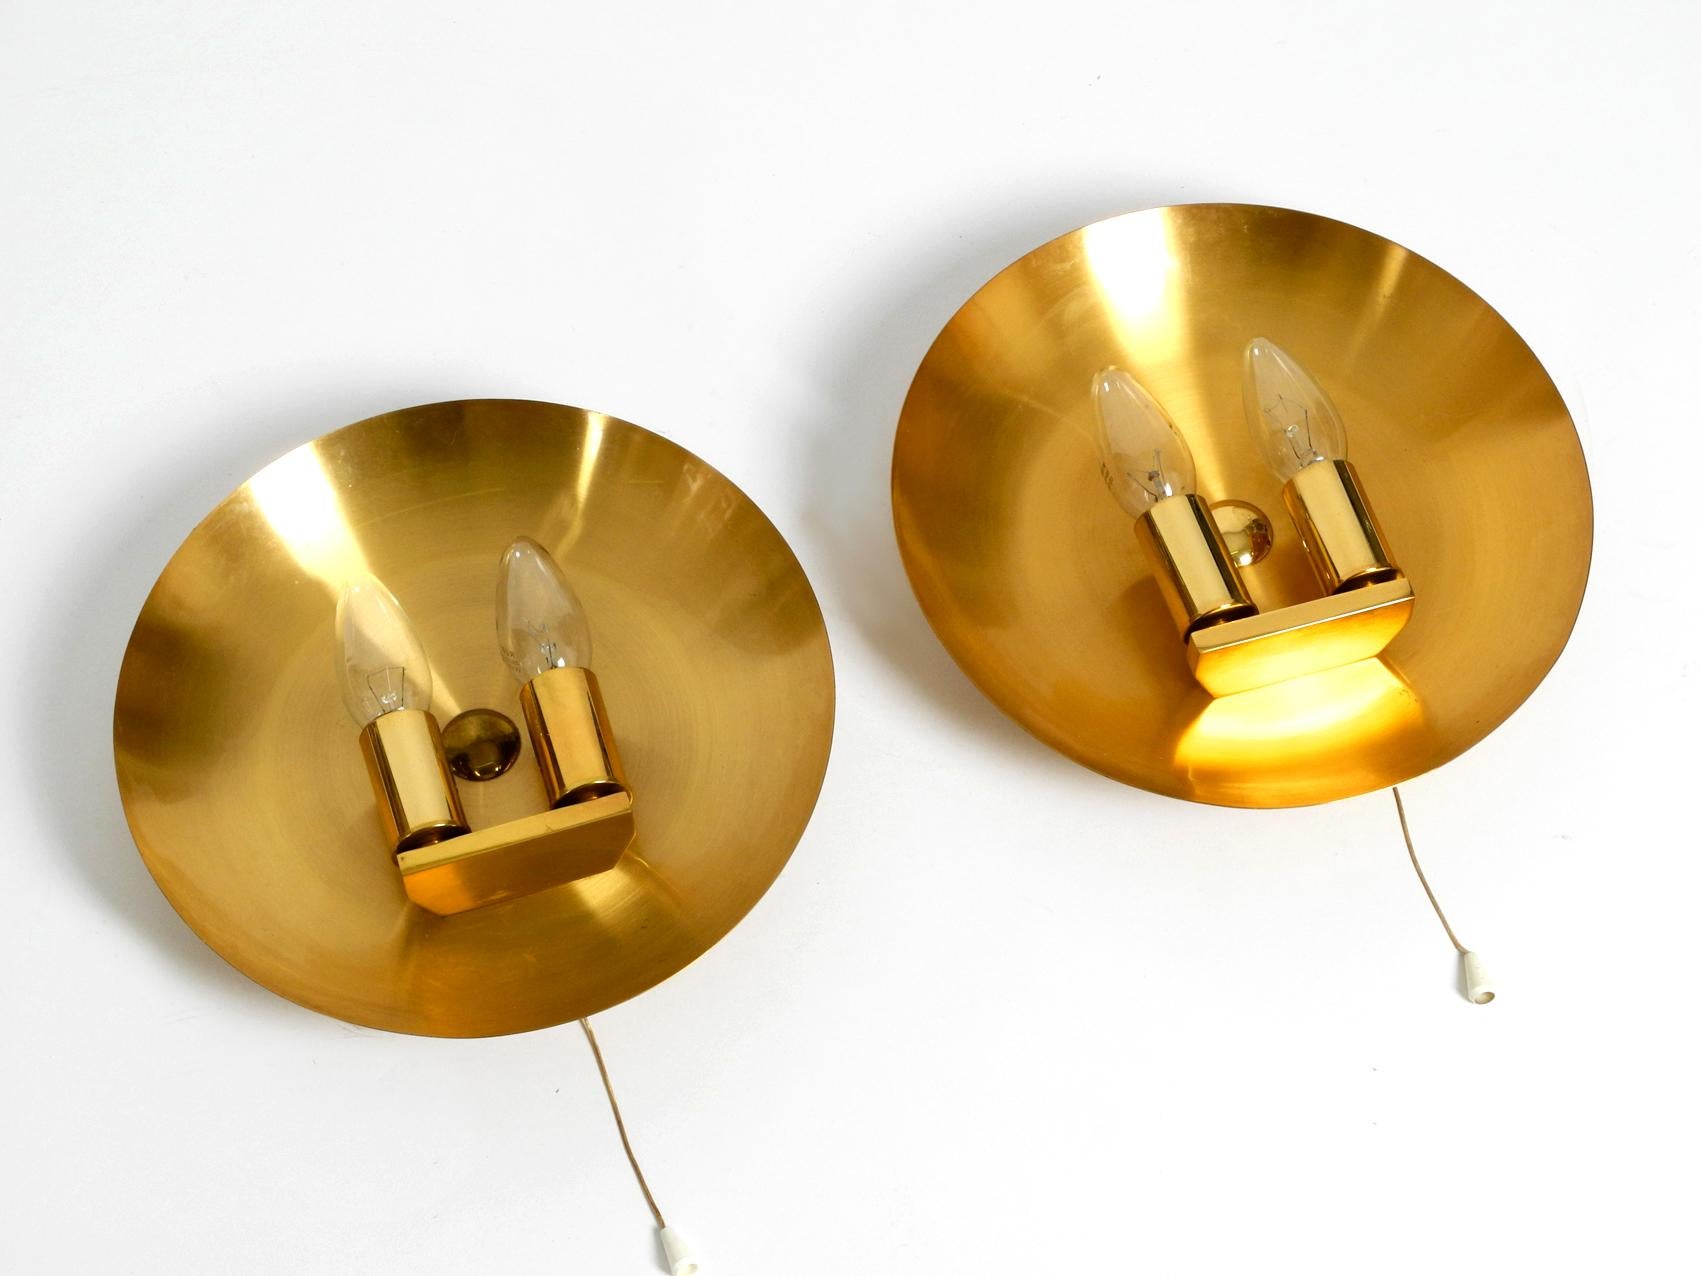 Mid-Century Modern Pair of Very Rare and High Quality 1970s Round Brass Wall Lamps, Sconces by WKR